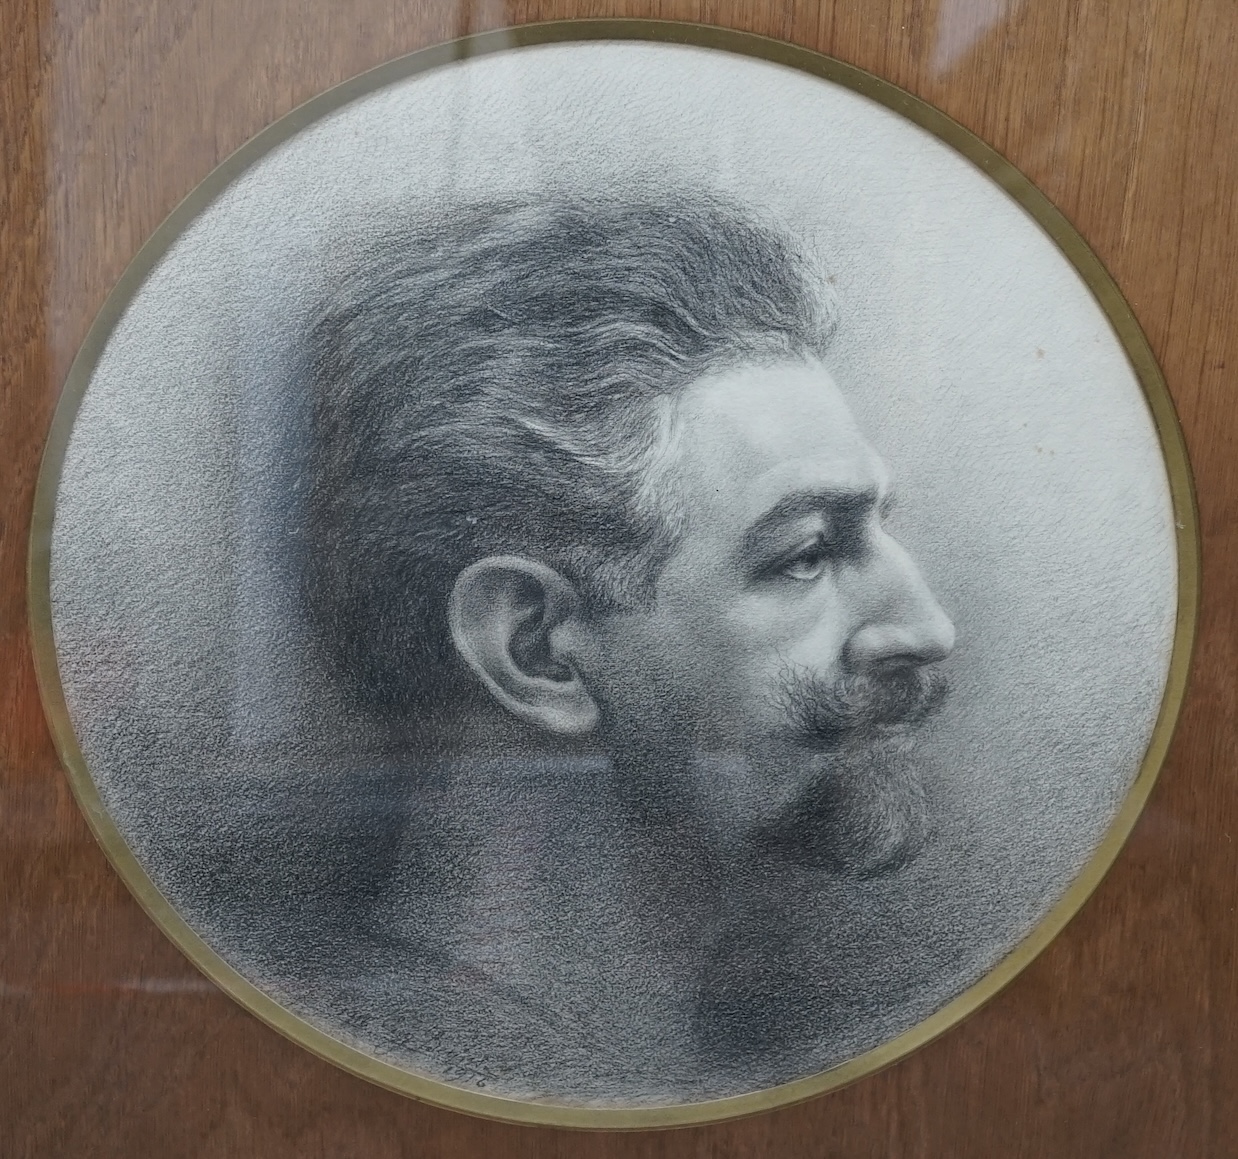 Early 20th century, charcoal, Portrait of Godefroid DeVreese (Belgian, 1861-1941), tondo, indistinctly signed and dated 1916, H. De Lau, Icelles label verso, 35cm in diameter. Condition - fair, a few minor spots of foxin